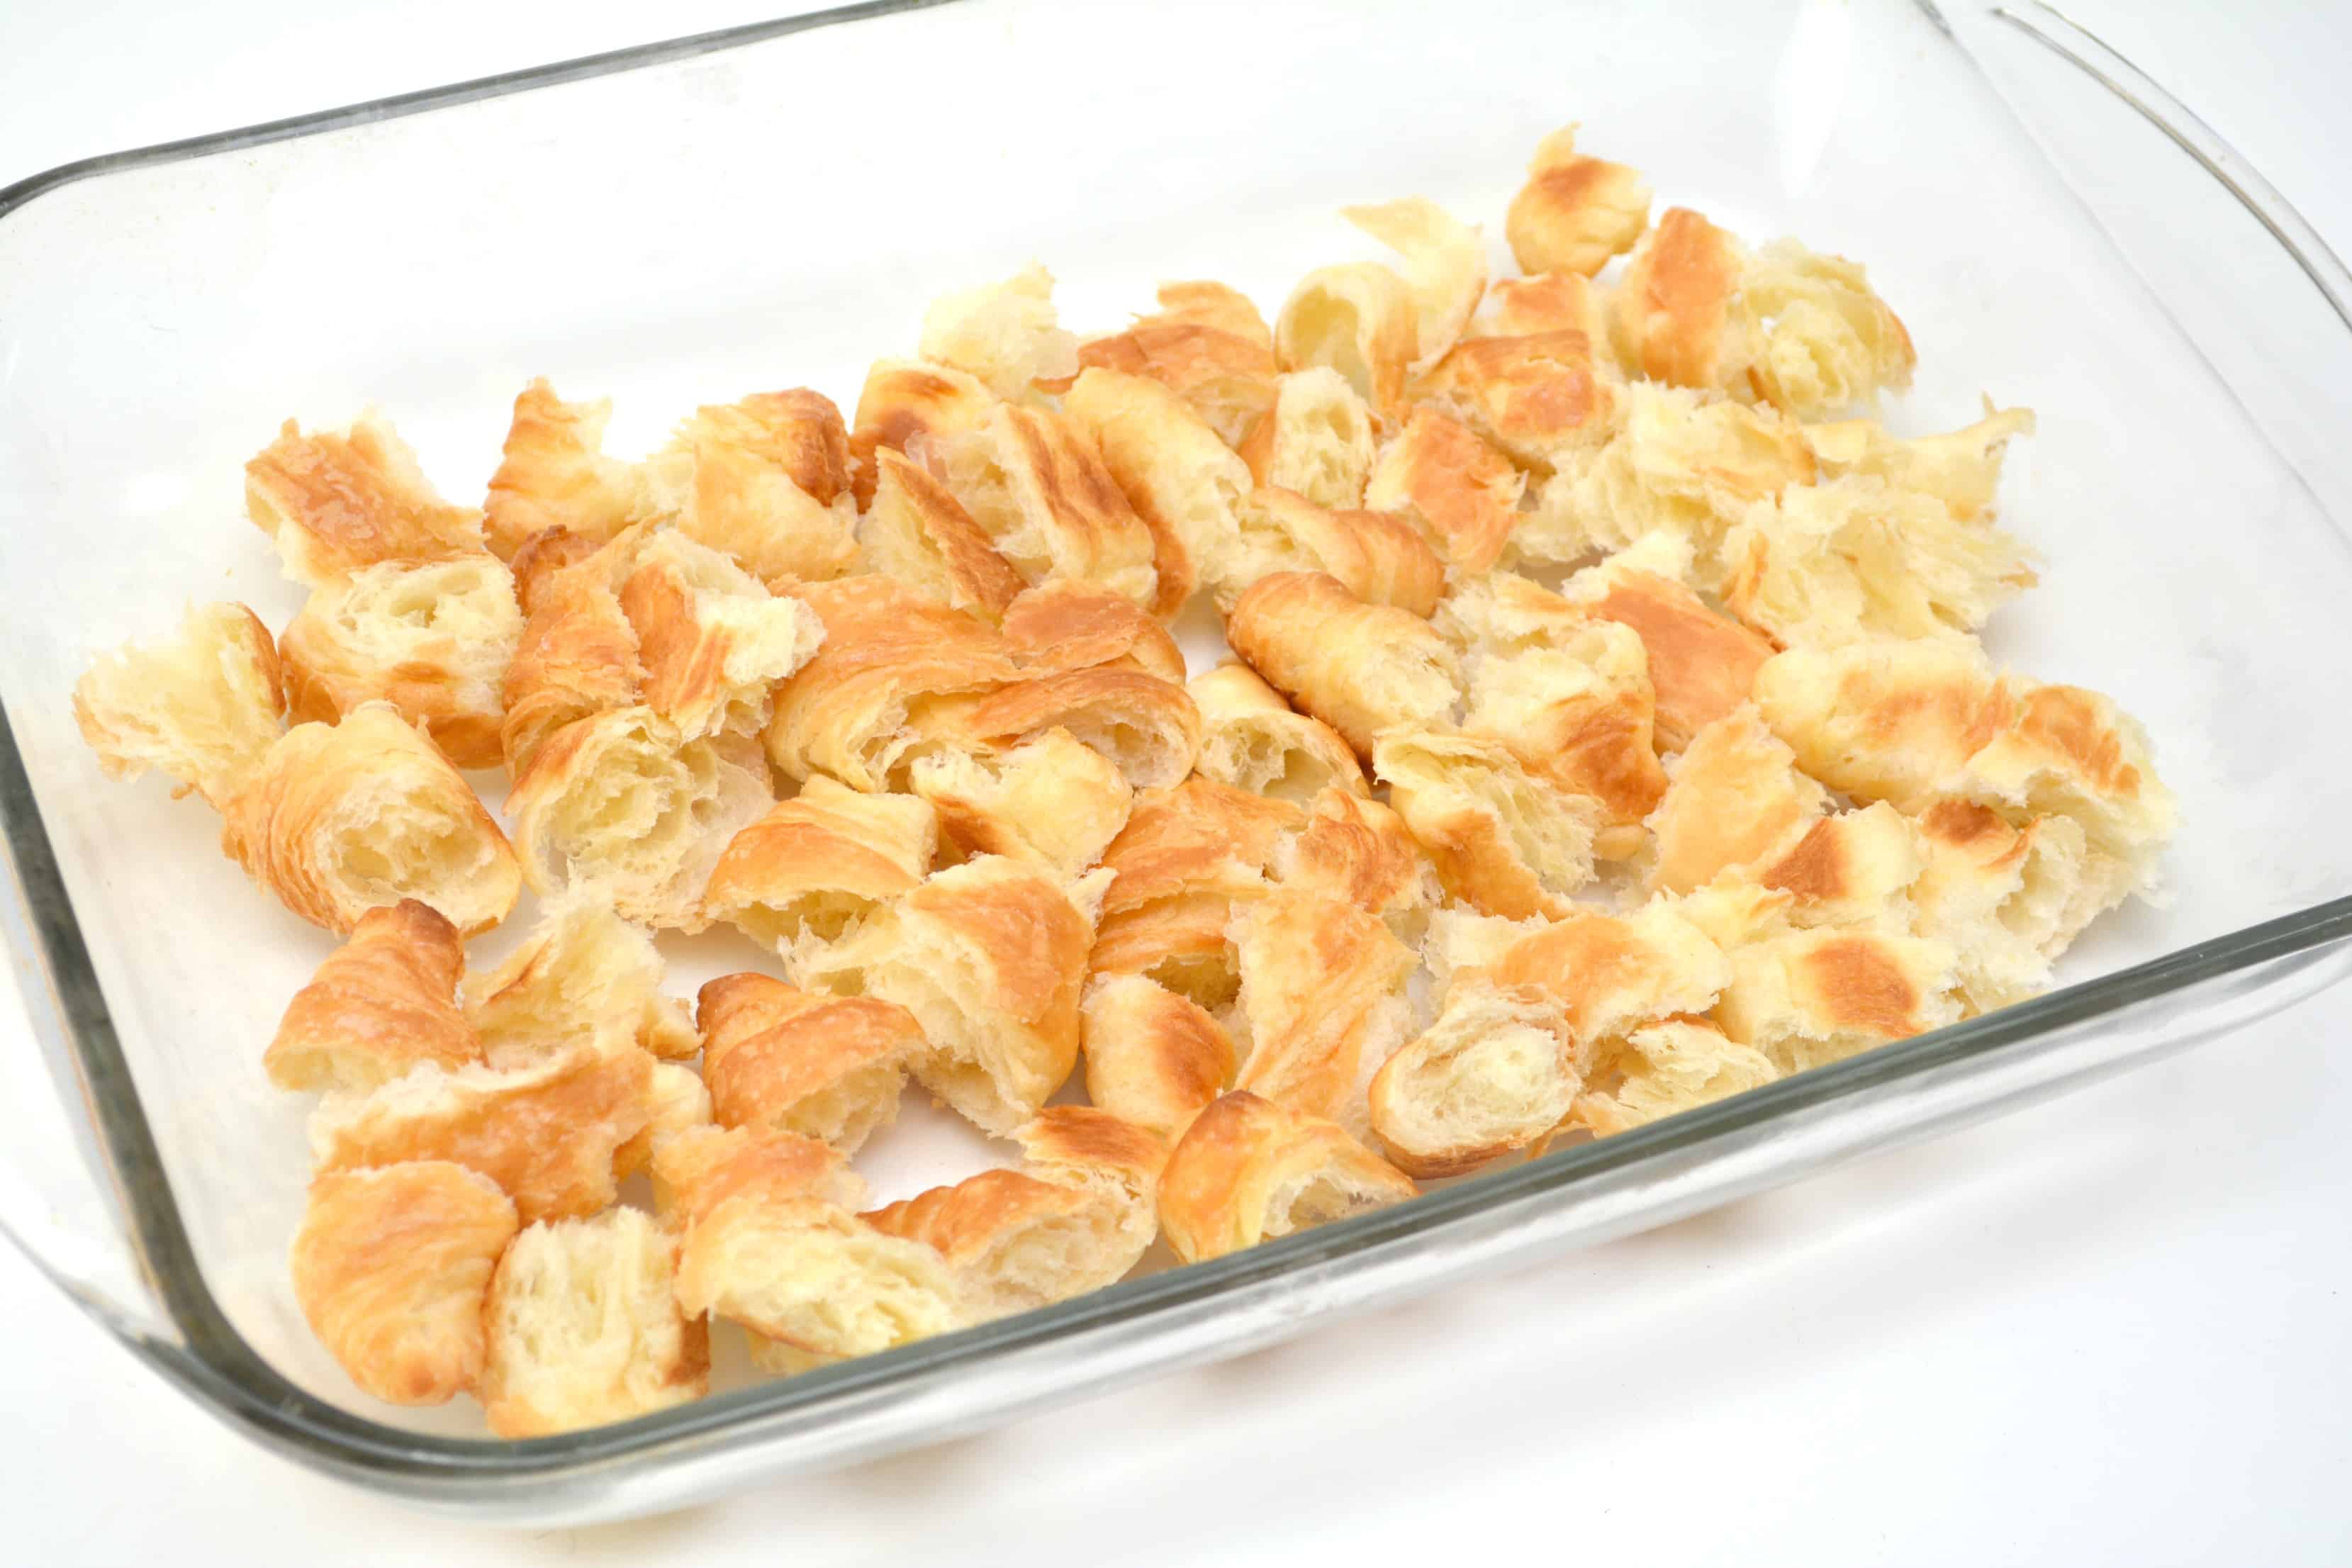 torn pieces of Croissants in a casserole dish